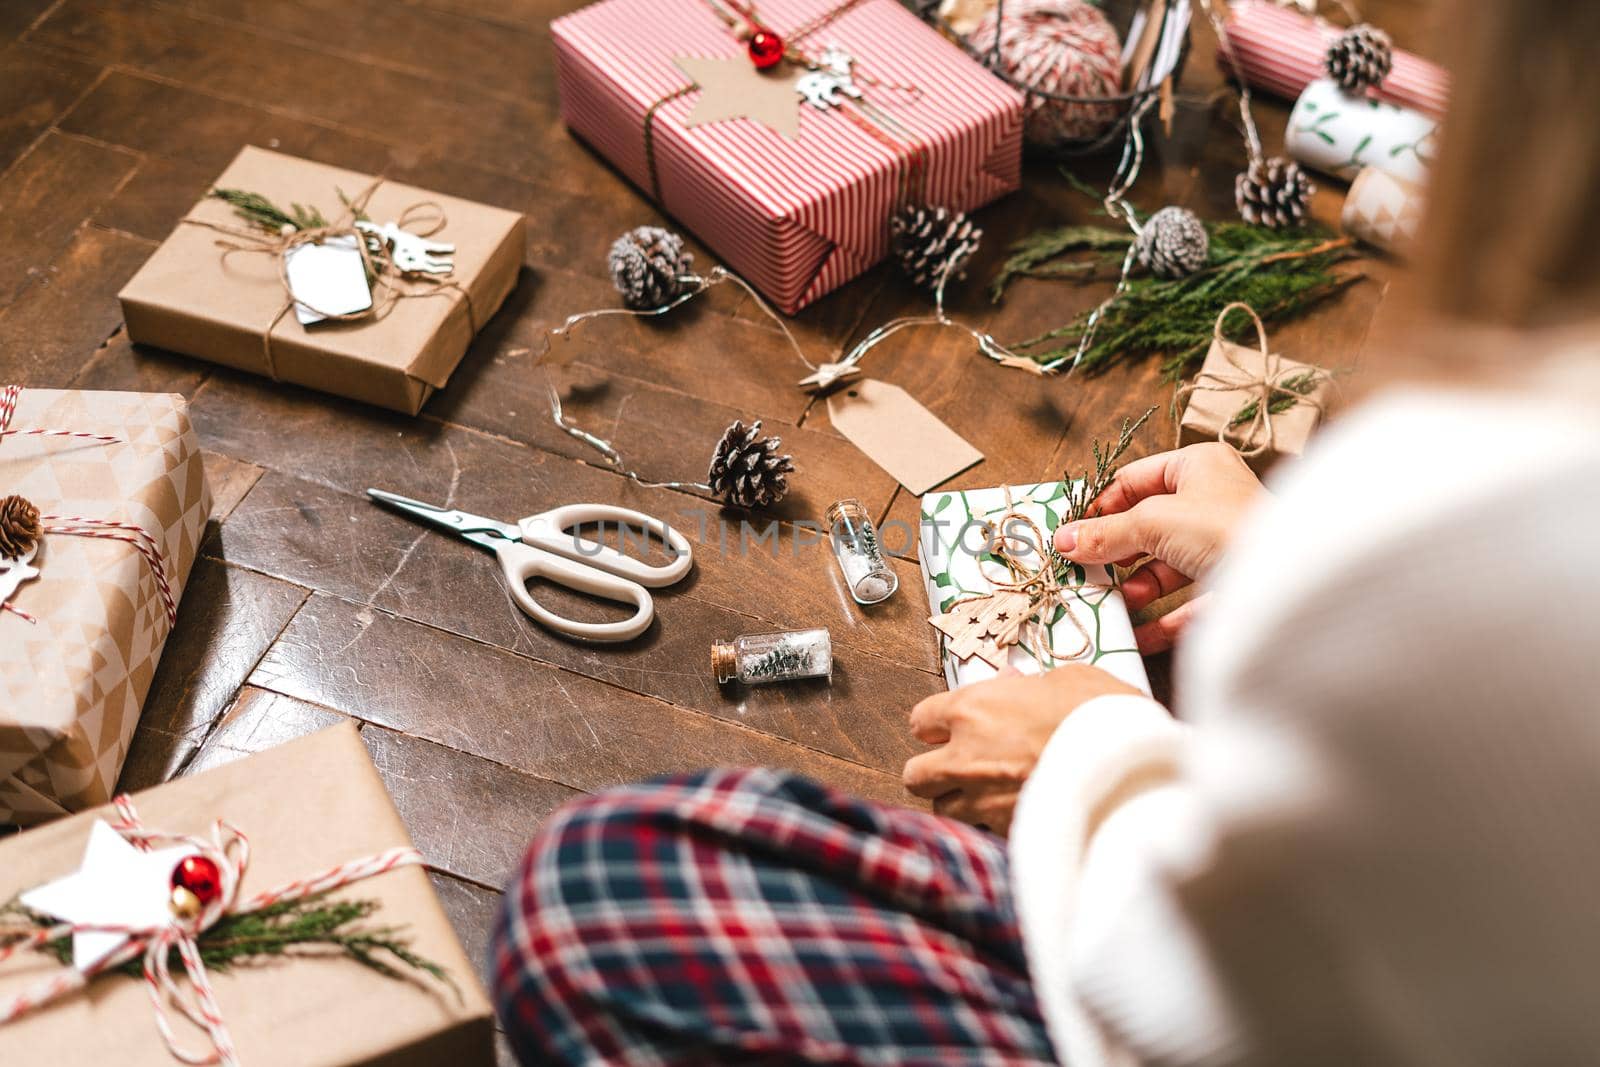 Woman s hands wrapping Christmas gift boxes, close up. Cropped female sit and preparing natural eco presents on floor with decor elements and items. Merry Christmas or New year DIY packing Concept.